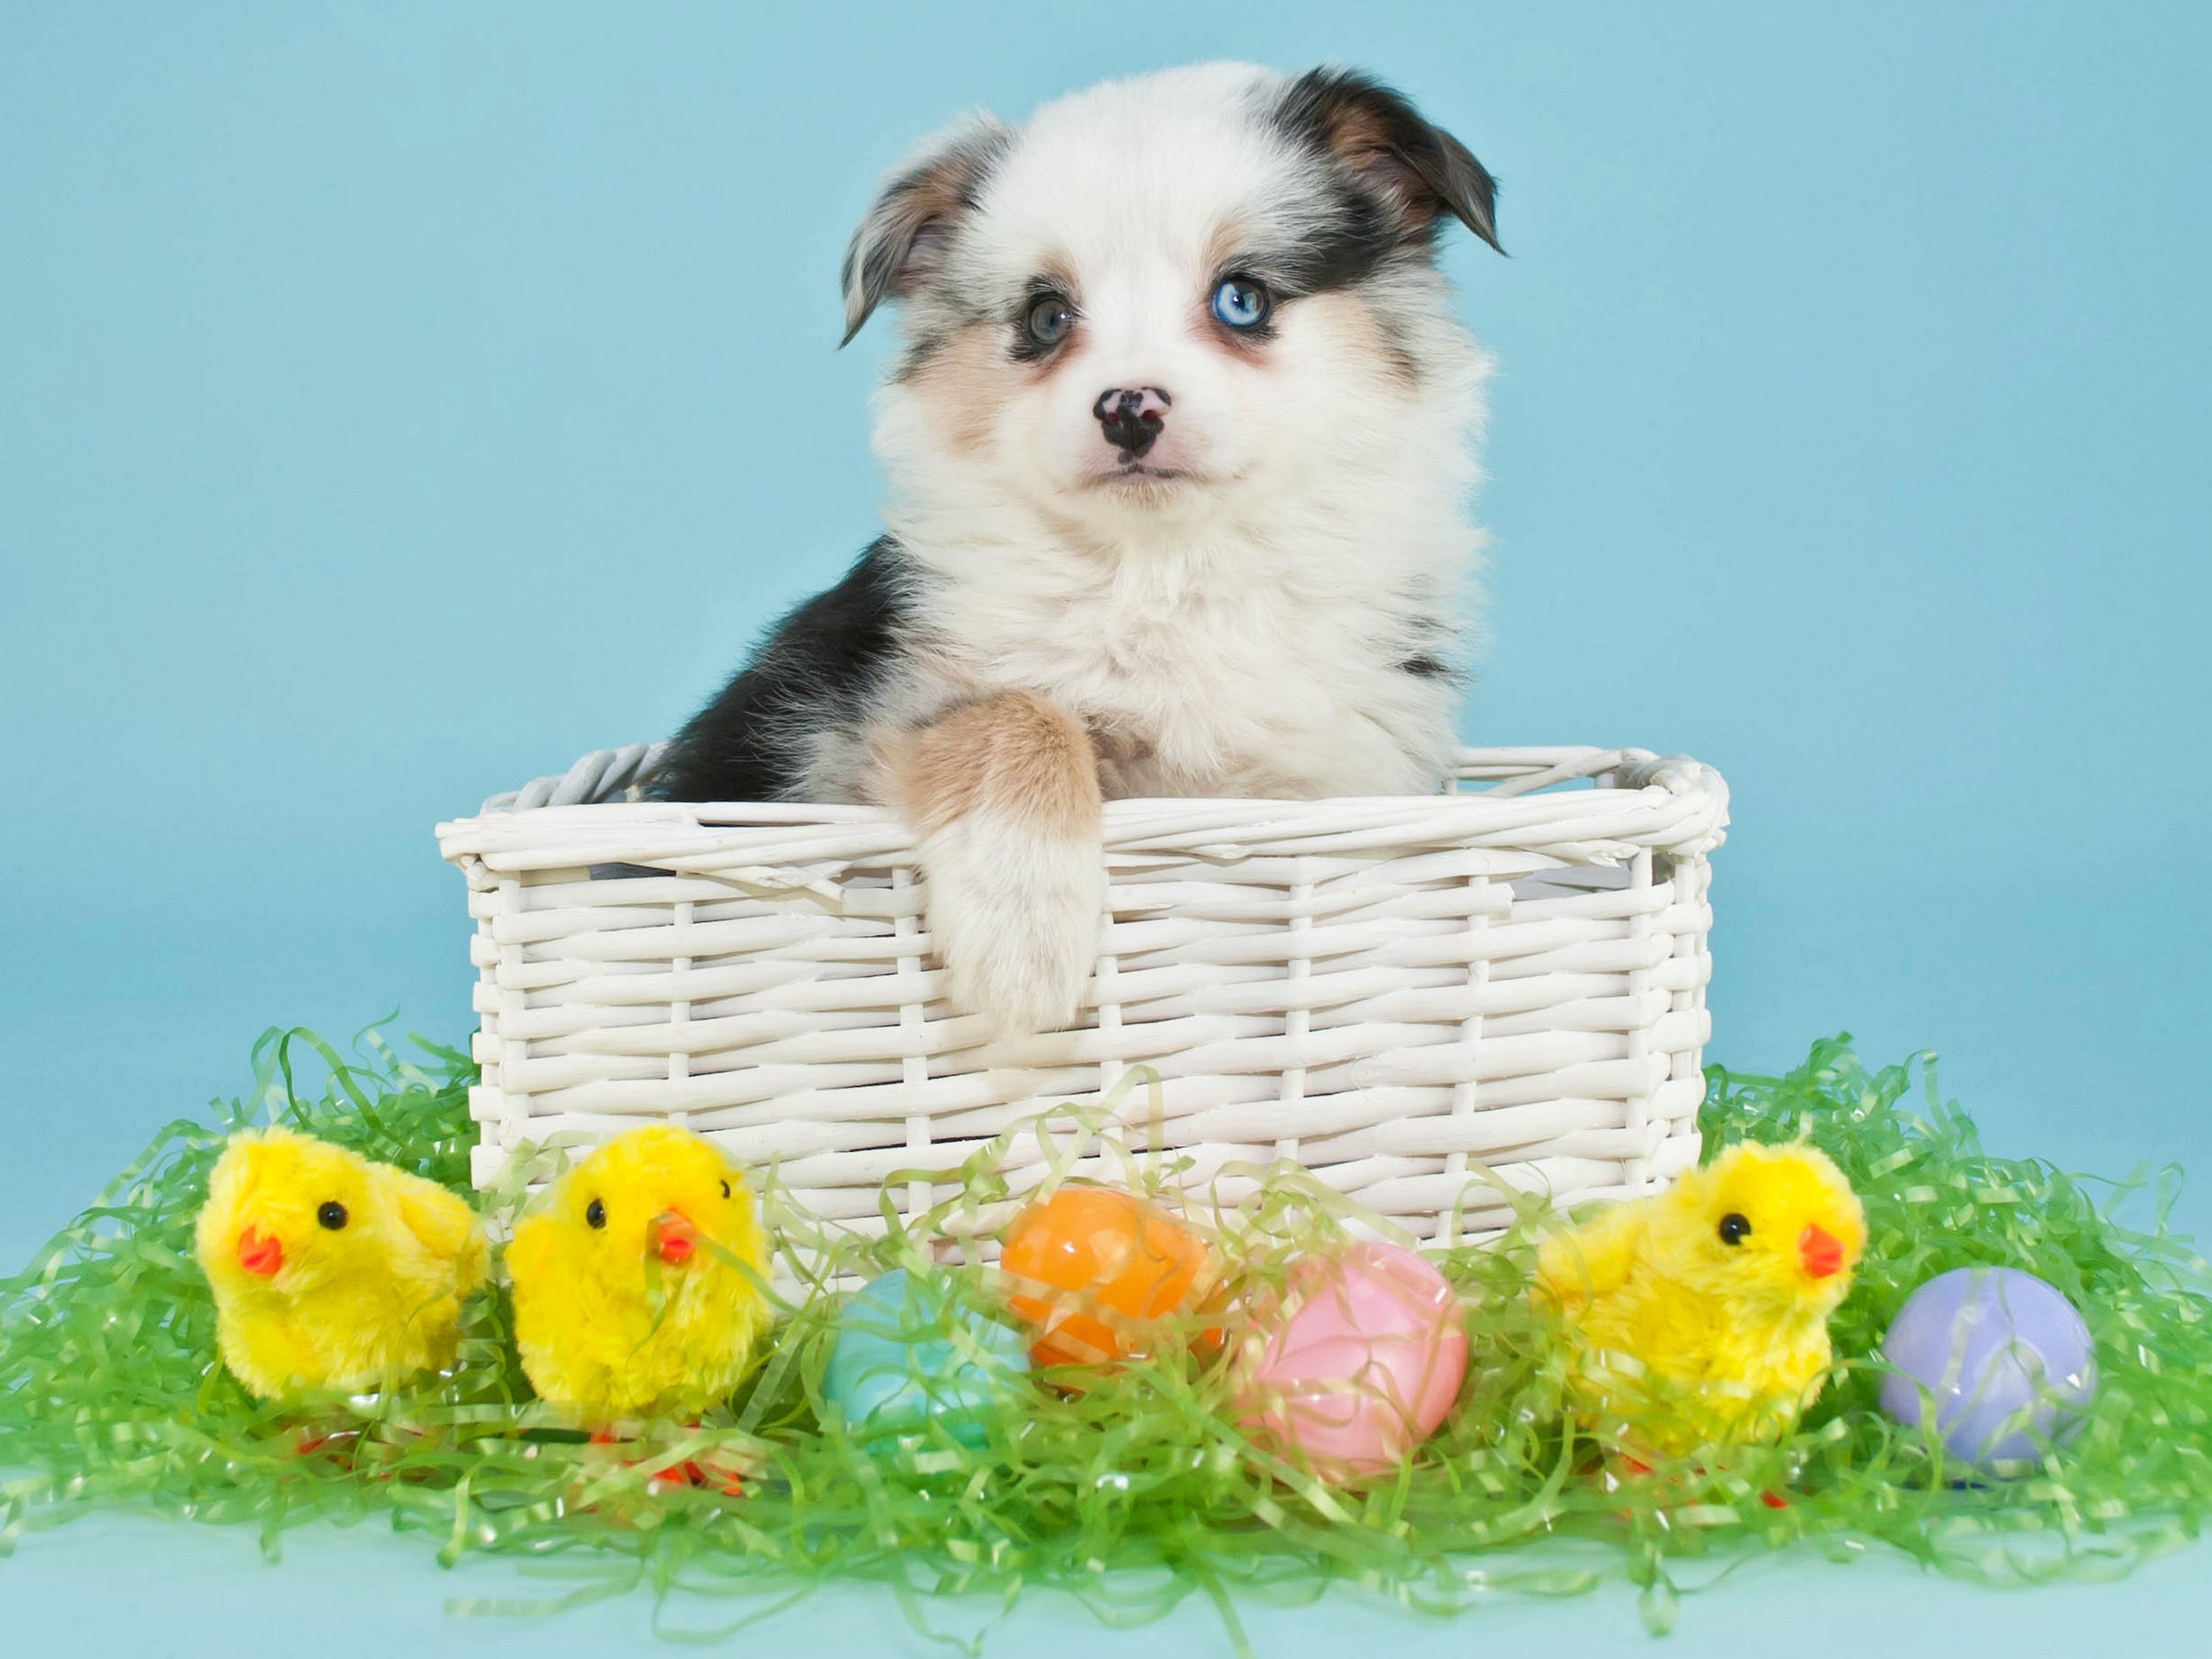 dogs, Holidays, Easter, Chickens, Puppy, Wicker, Basket, Eggs, Animals Wallpaper